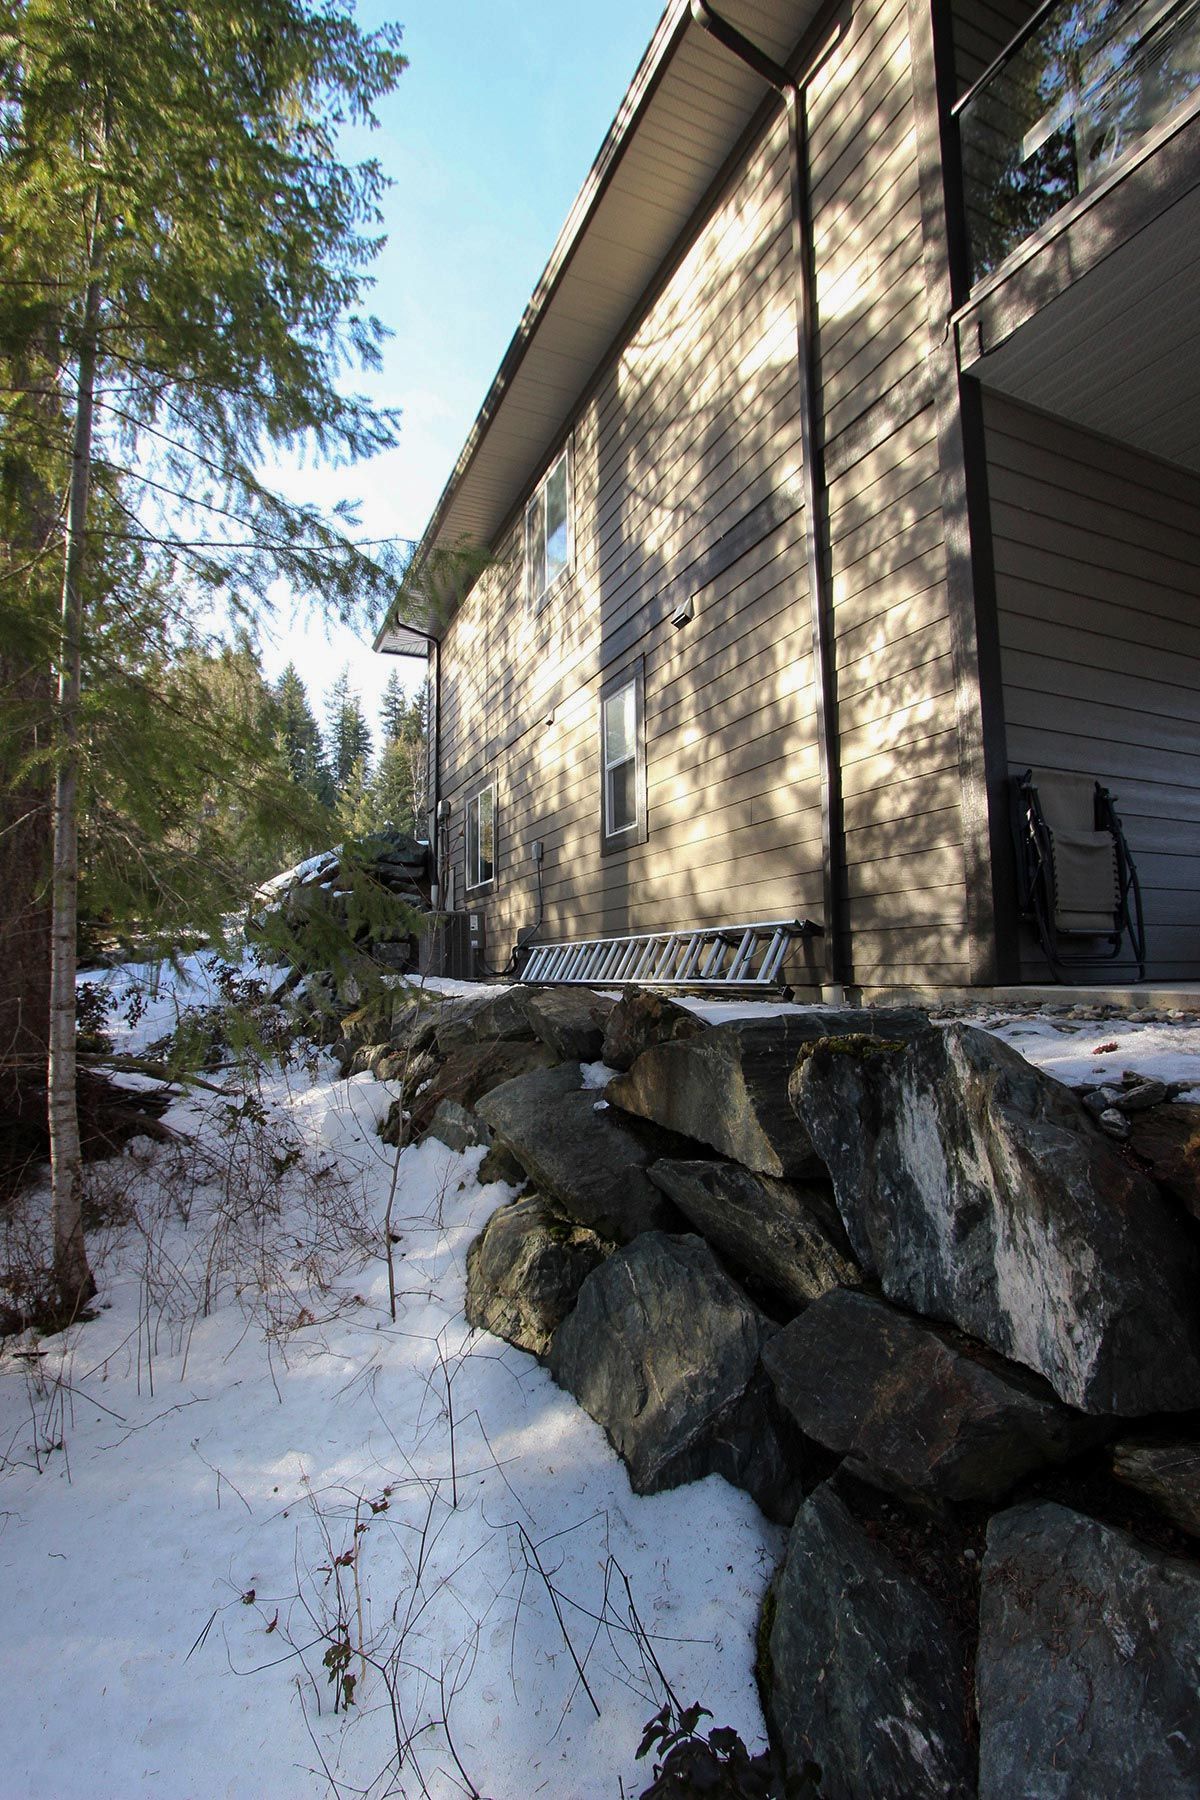 Photo 5: Photos: 2762 Valleyview Drive in Blind Bay: House for sale : MLS®# 10245854